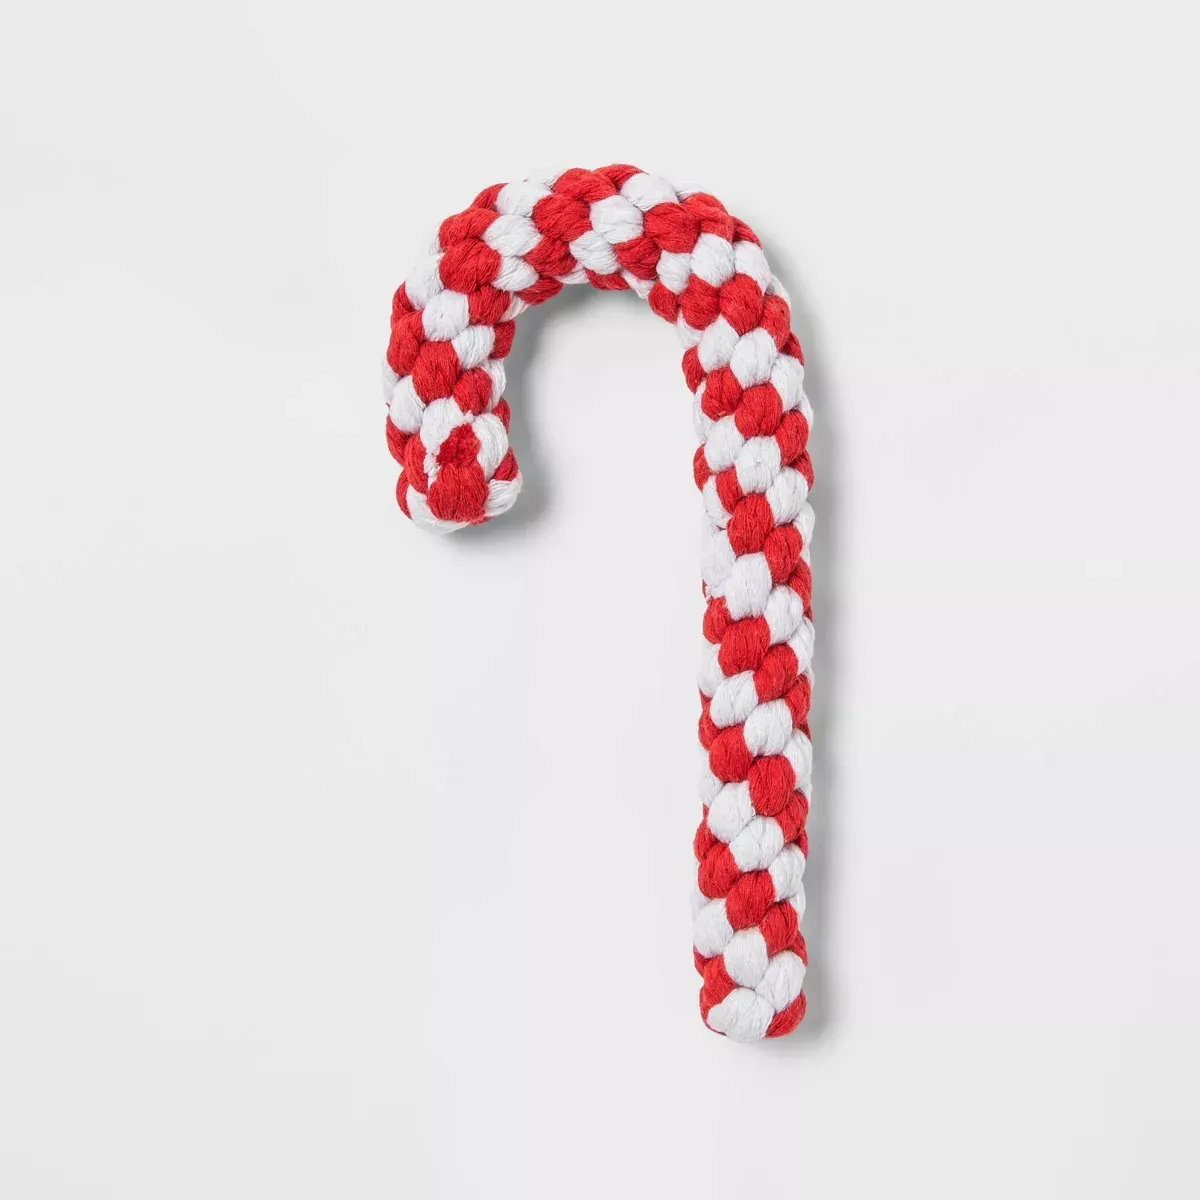 Candy cane rope toy